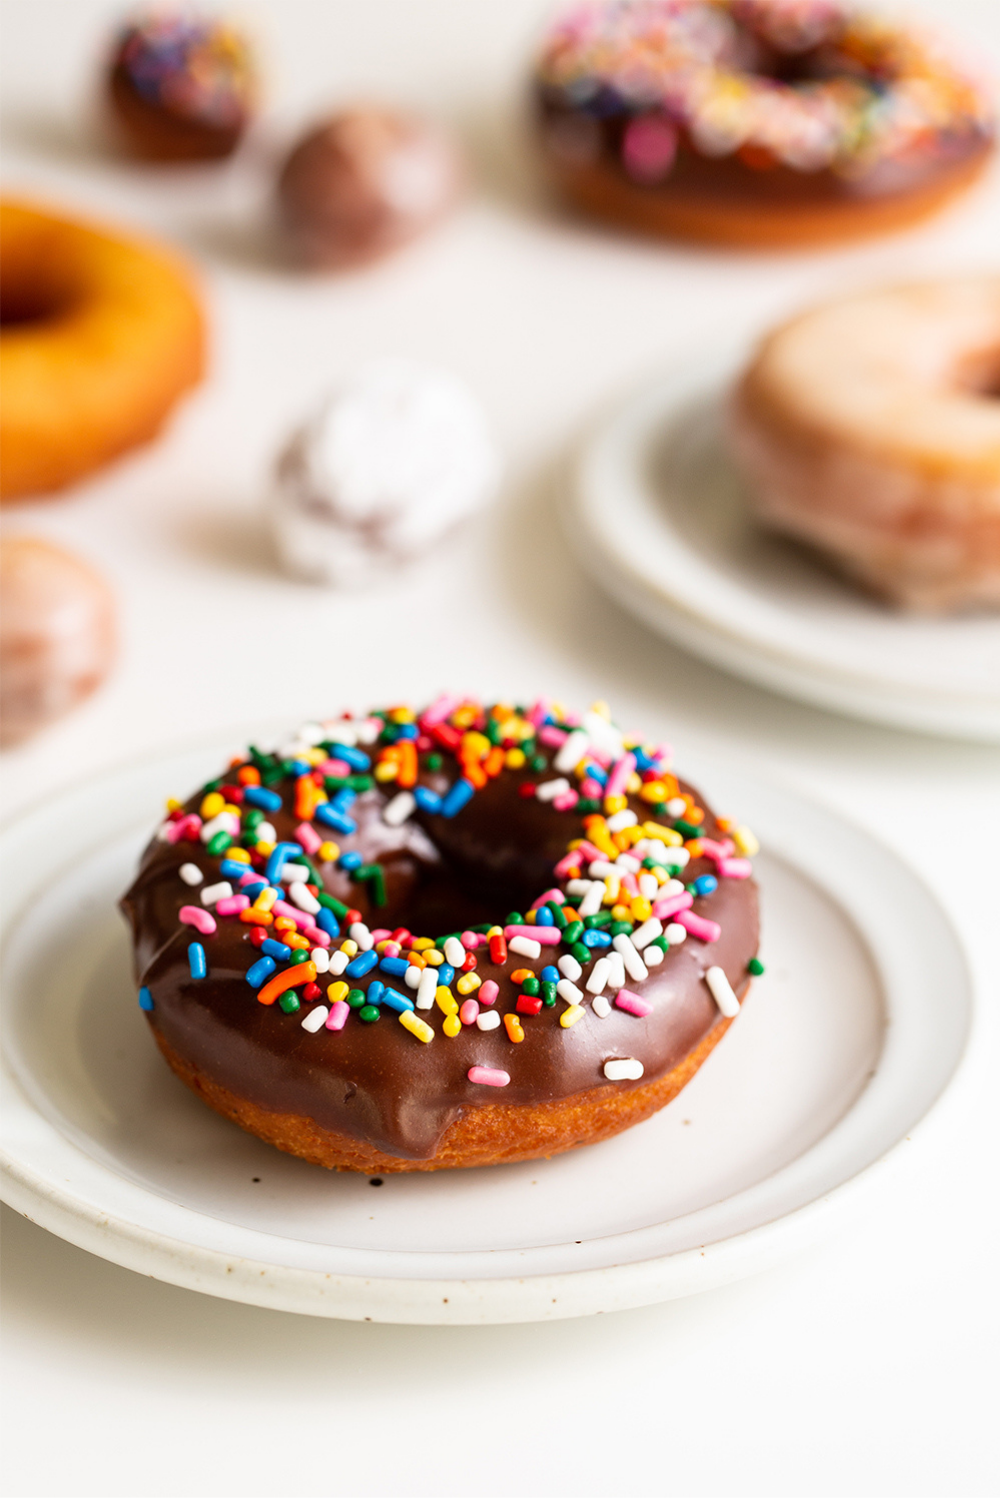 a chocolate-iced donut with sprinkles on a plate, ready to serve.